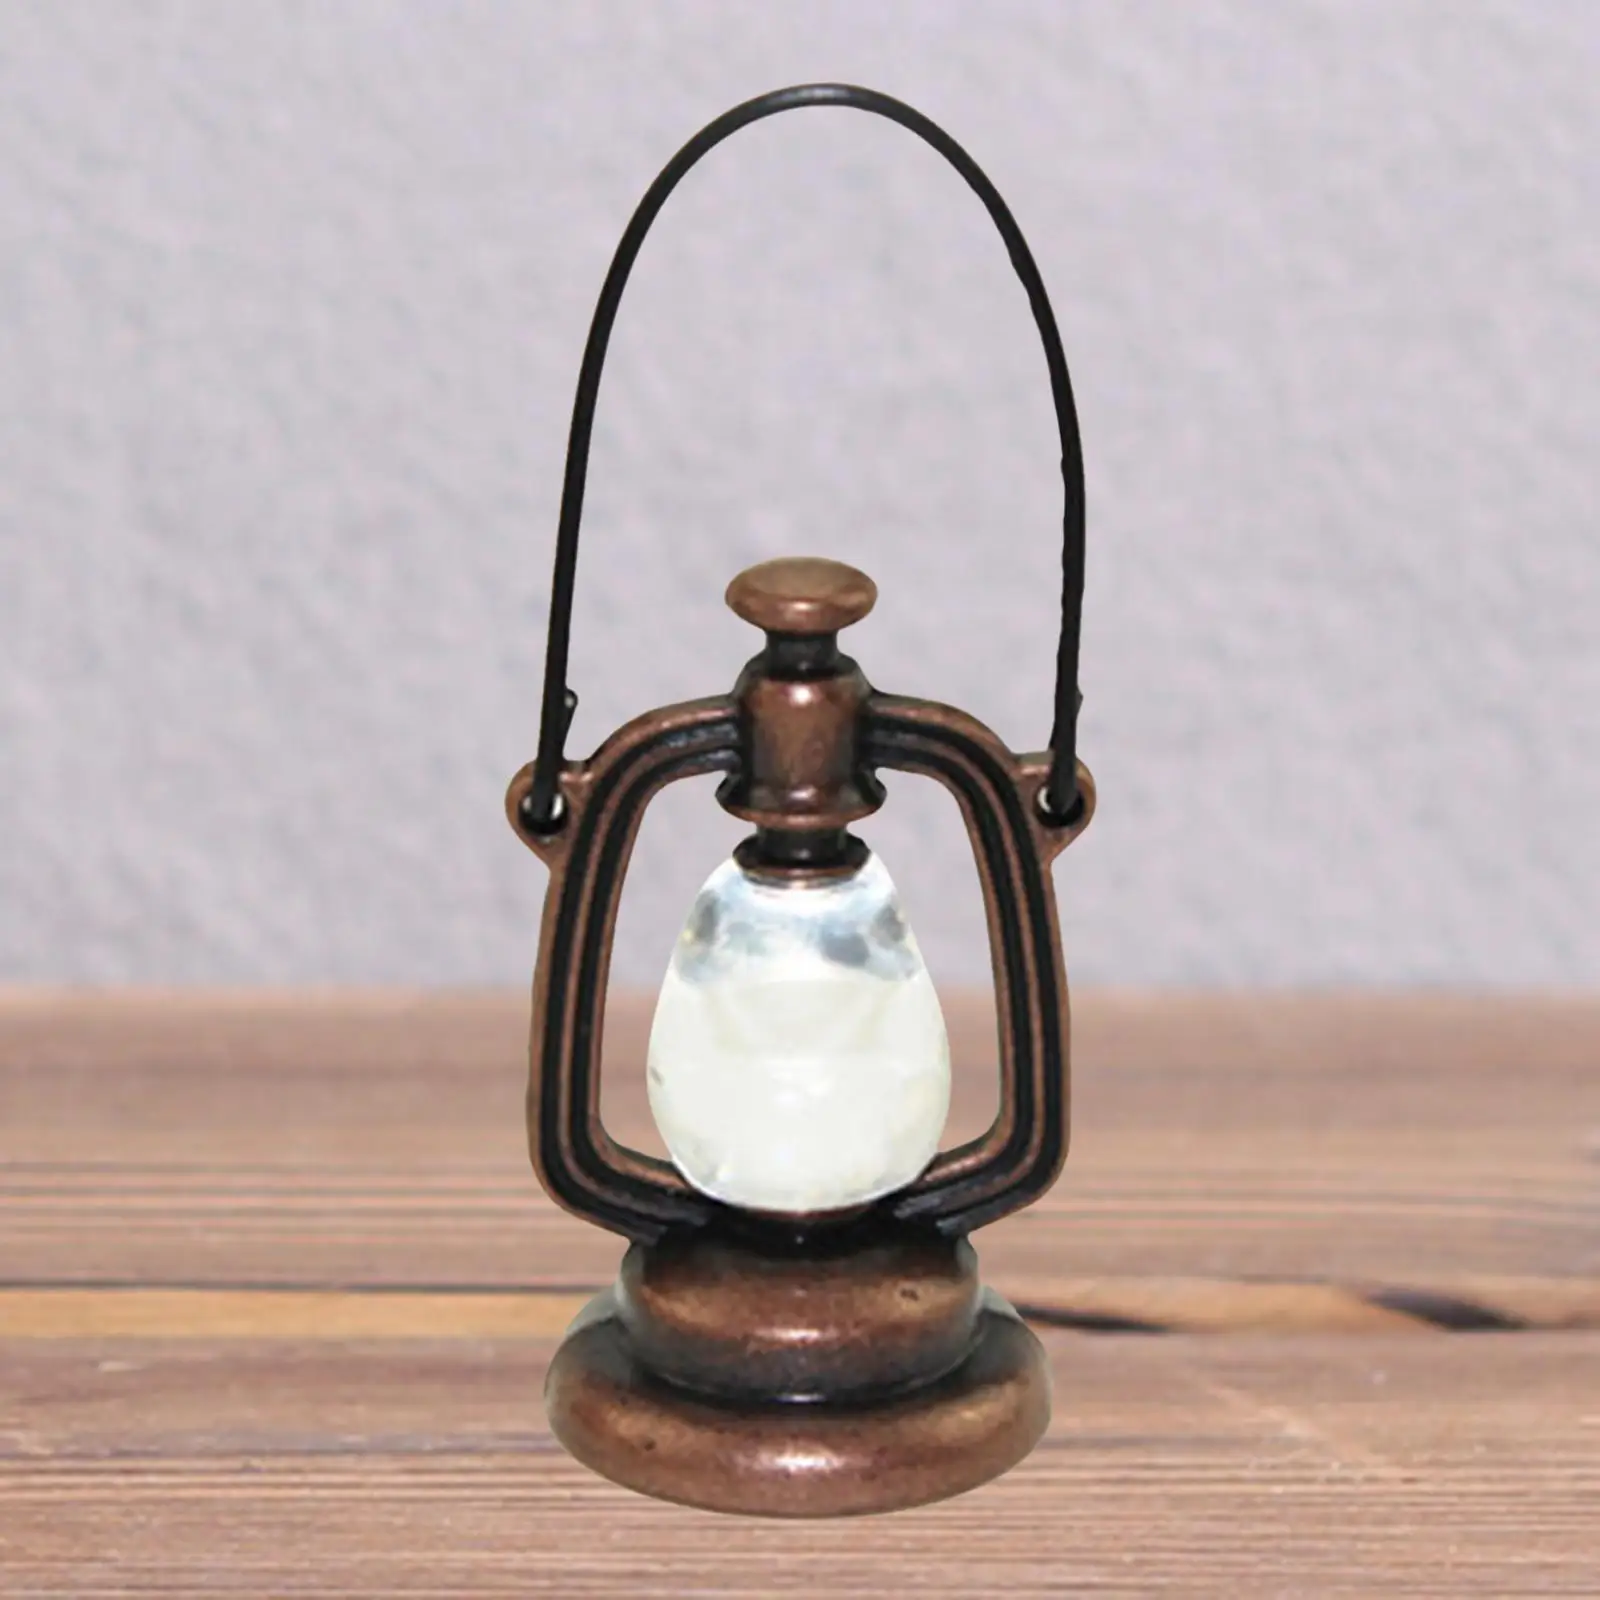 Mini Dollhouse Retro Oil Lamp Miniature 1/12 Accessories Lamp with Handle DIY Play Model Dollhouse Oil Lamp for 3-6 Years Old